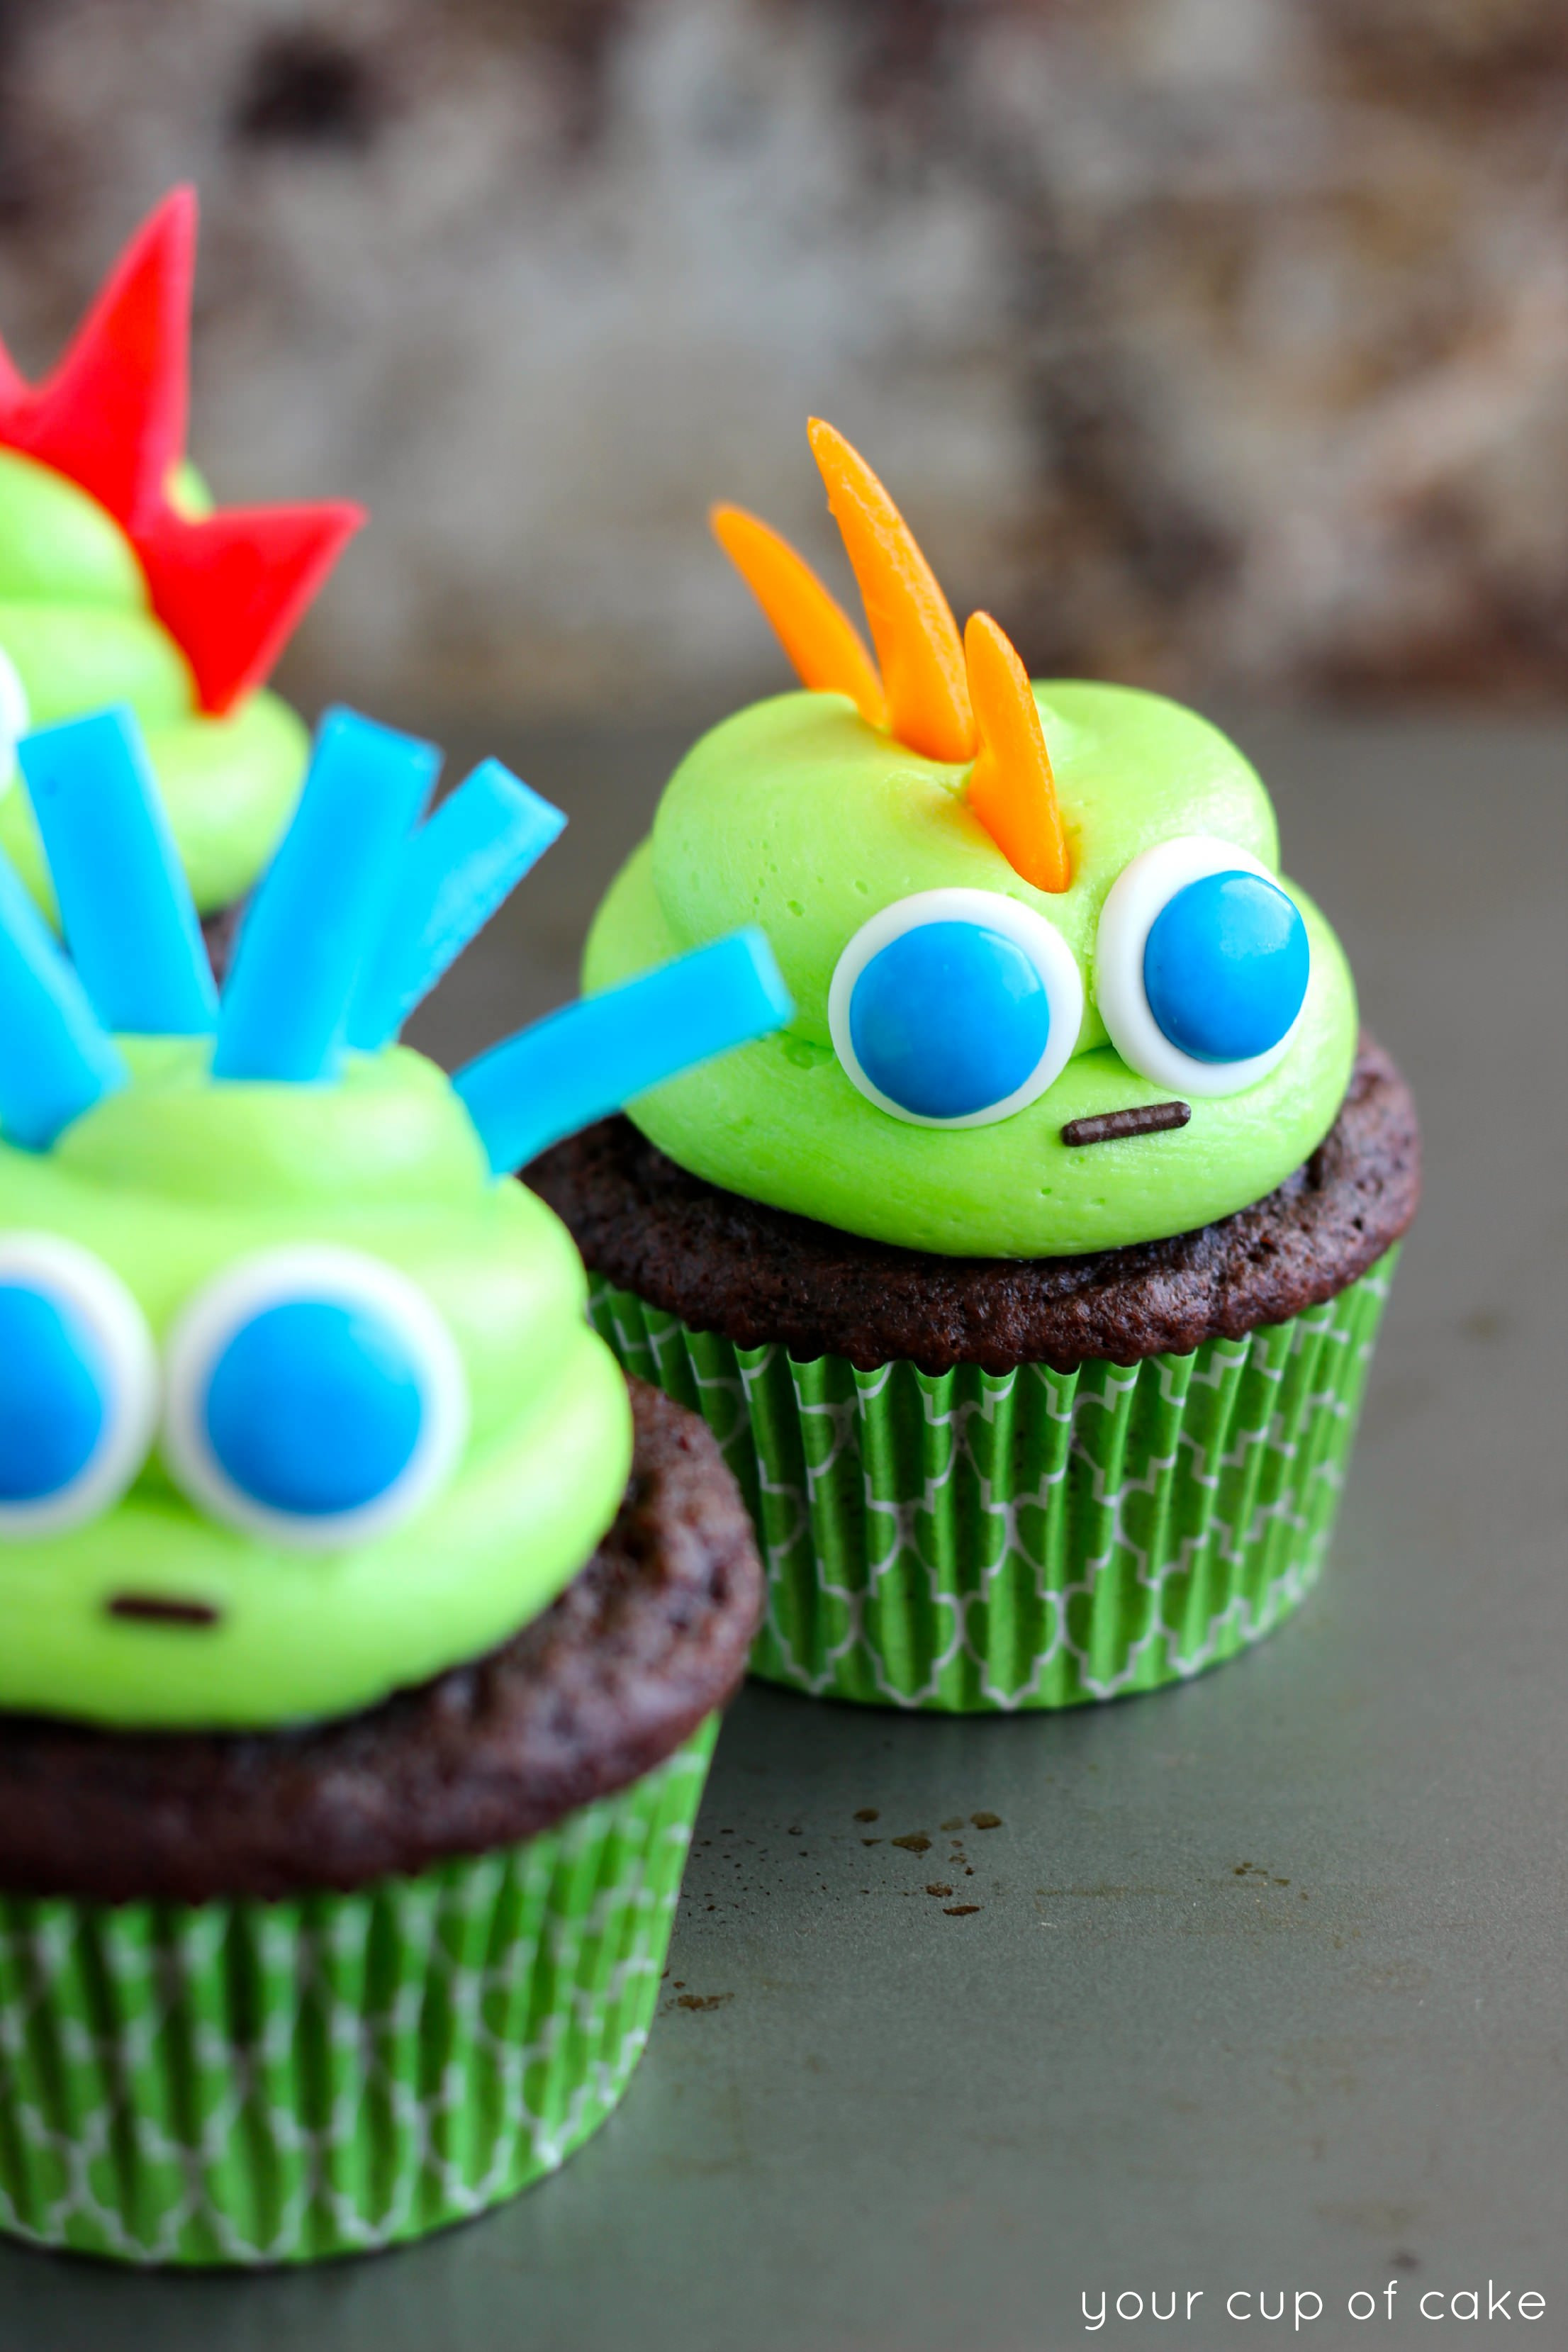 Easy Halloween Cupcakes
 Easy Halloween Cupcake Ideas Your Cup of Cake